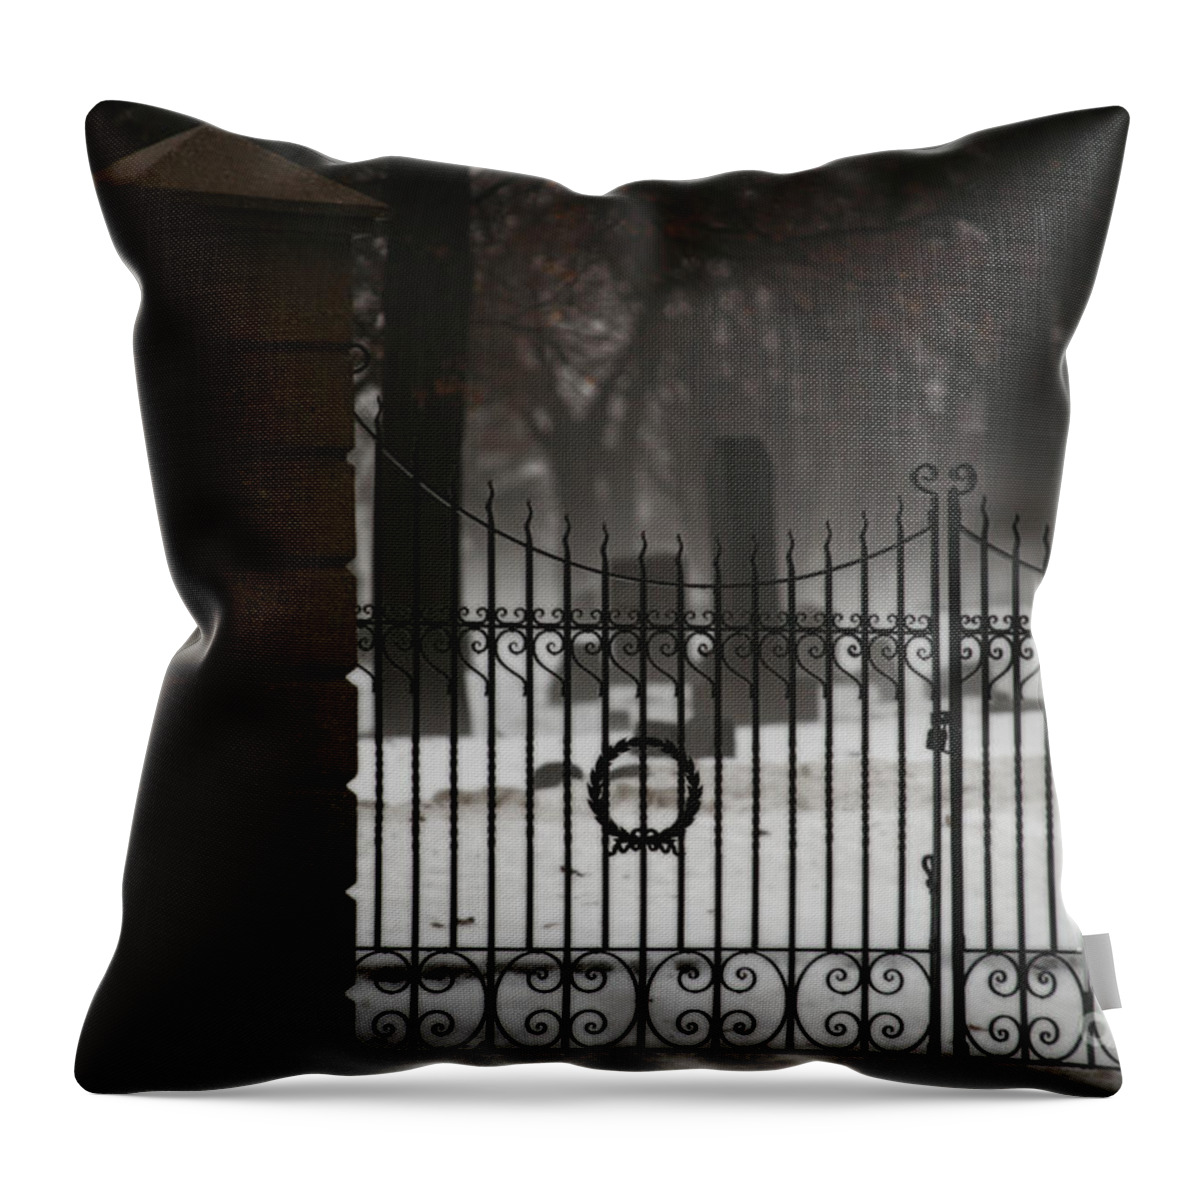 Fence Throw Pillow featuring the photograph Hopeful Expectation by Linda Shafer